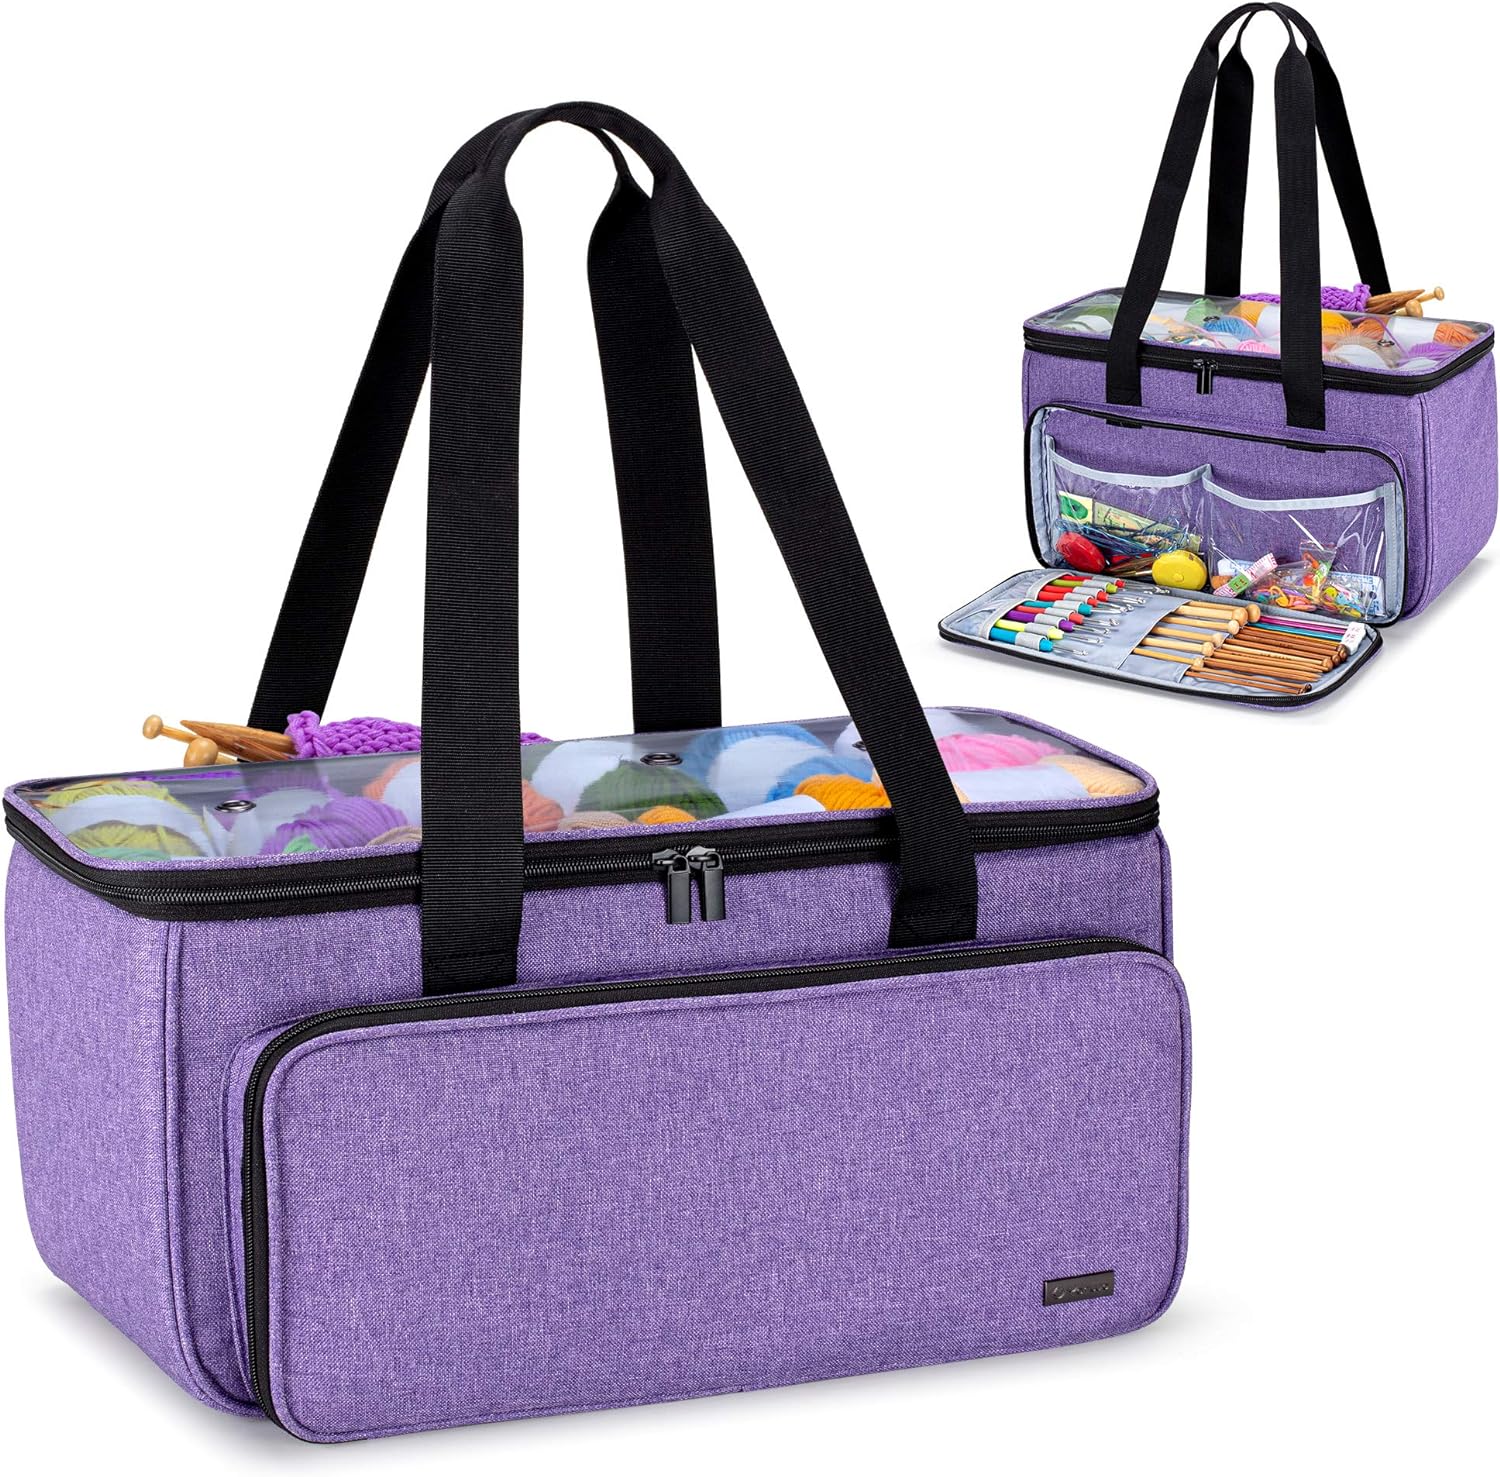 Yarwo Knitting Yarn Bag, Crochet Tote with Pocket for WIP projects, Knitting Needles(Up to 14) and Skeins of Yarn, Perfect Valentines Day Gifts, Purple (Bag Only)